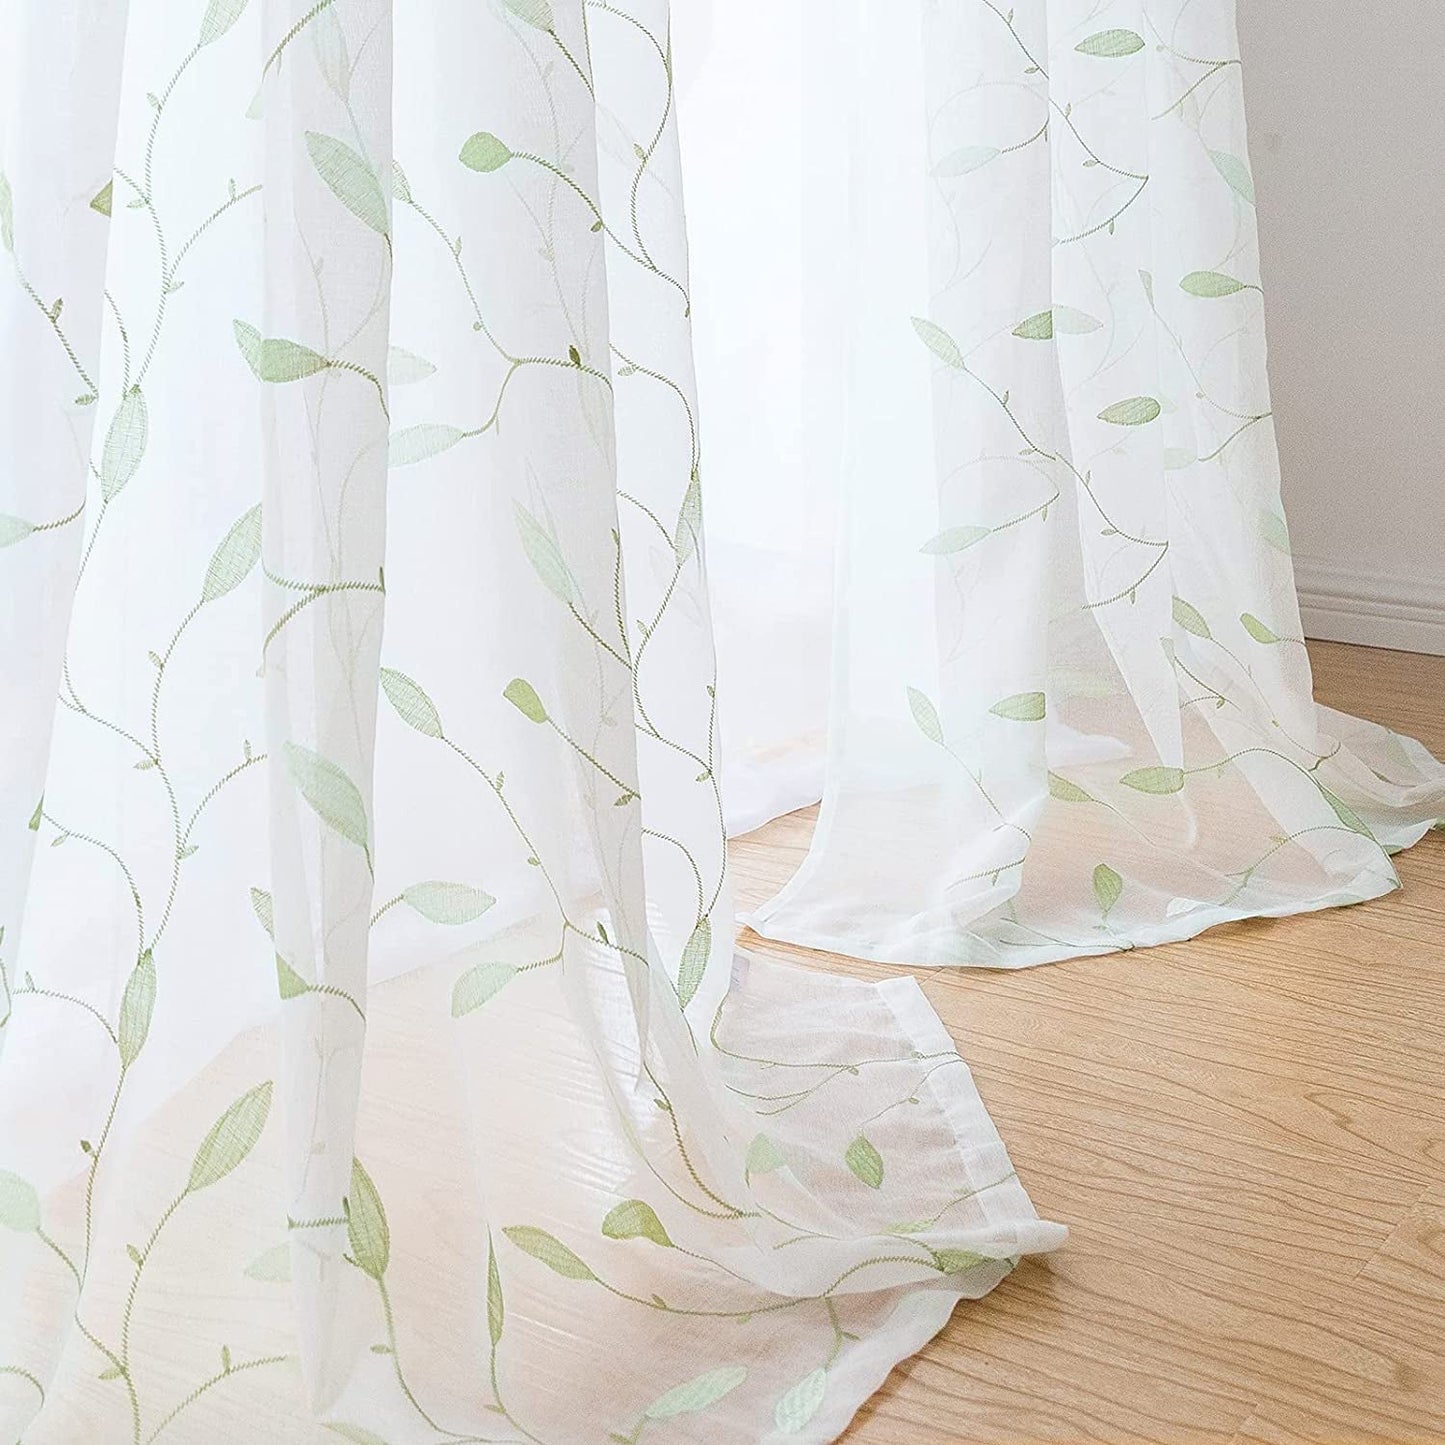 Lazzzy Sheer Curtains Embroidered Floral Leaf Voile Drapes for Bedroom Living Room Grommet Top Window Treatments 2 Panels 84 Inches Green on White